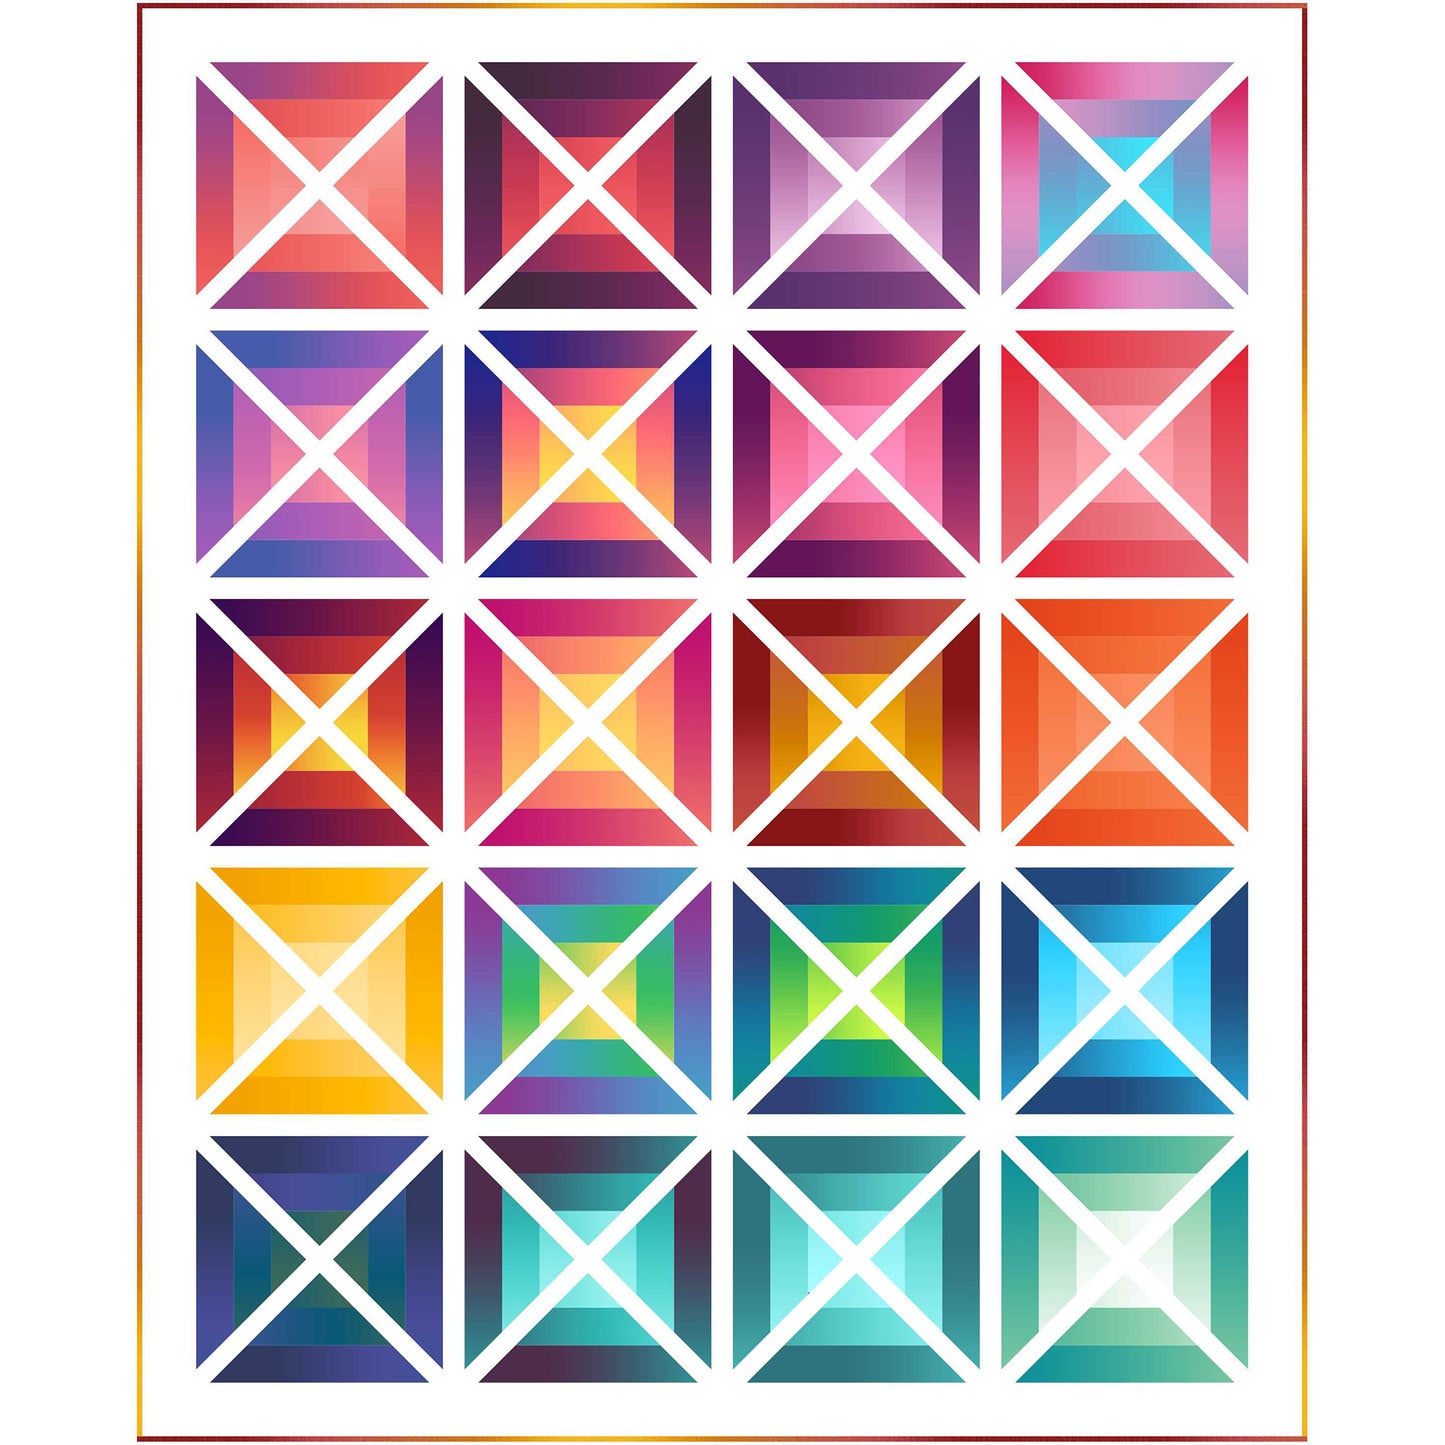 Hermosa 2.0 Quilt NH-2302e - Downloadable Pattern